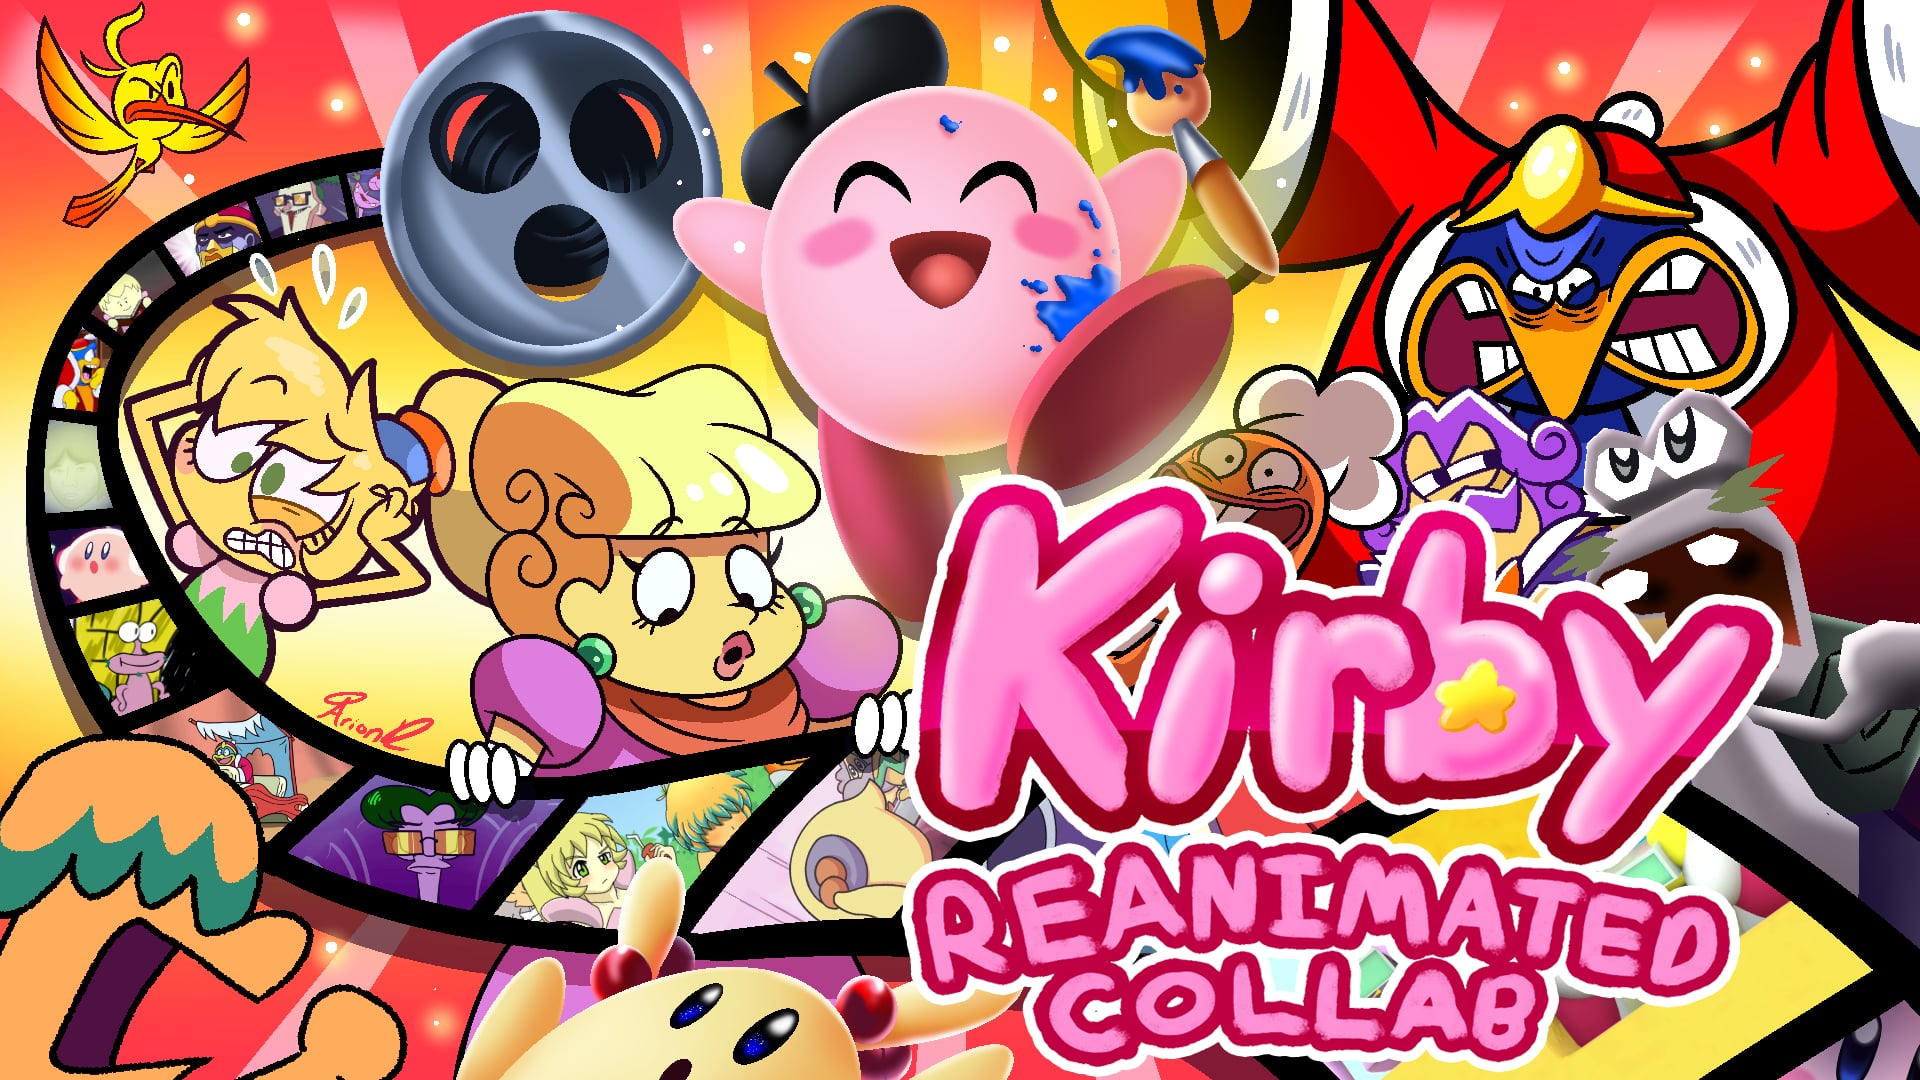 Kirby Reanimated Collab on Vimeo